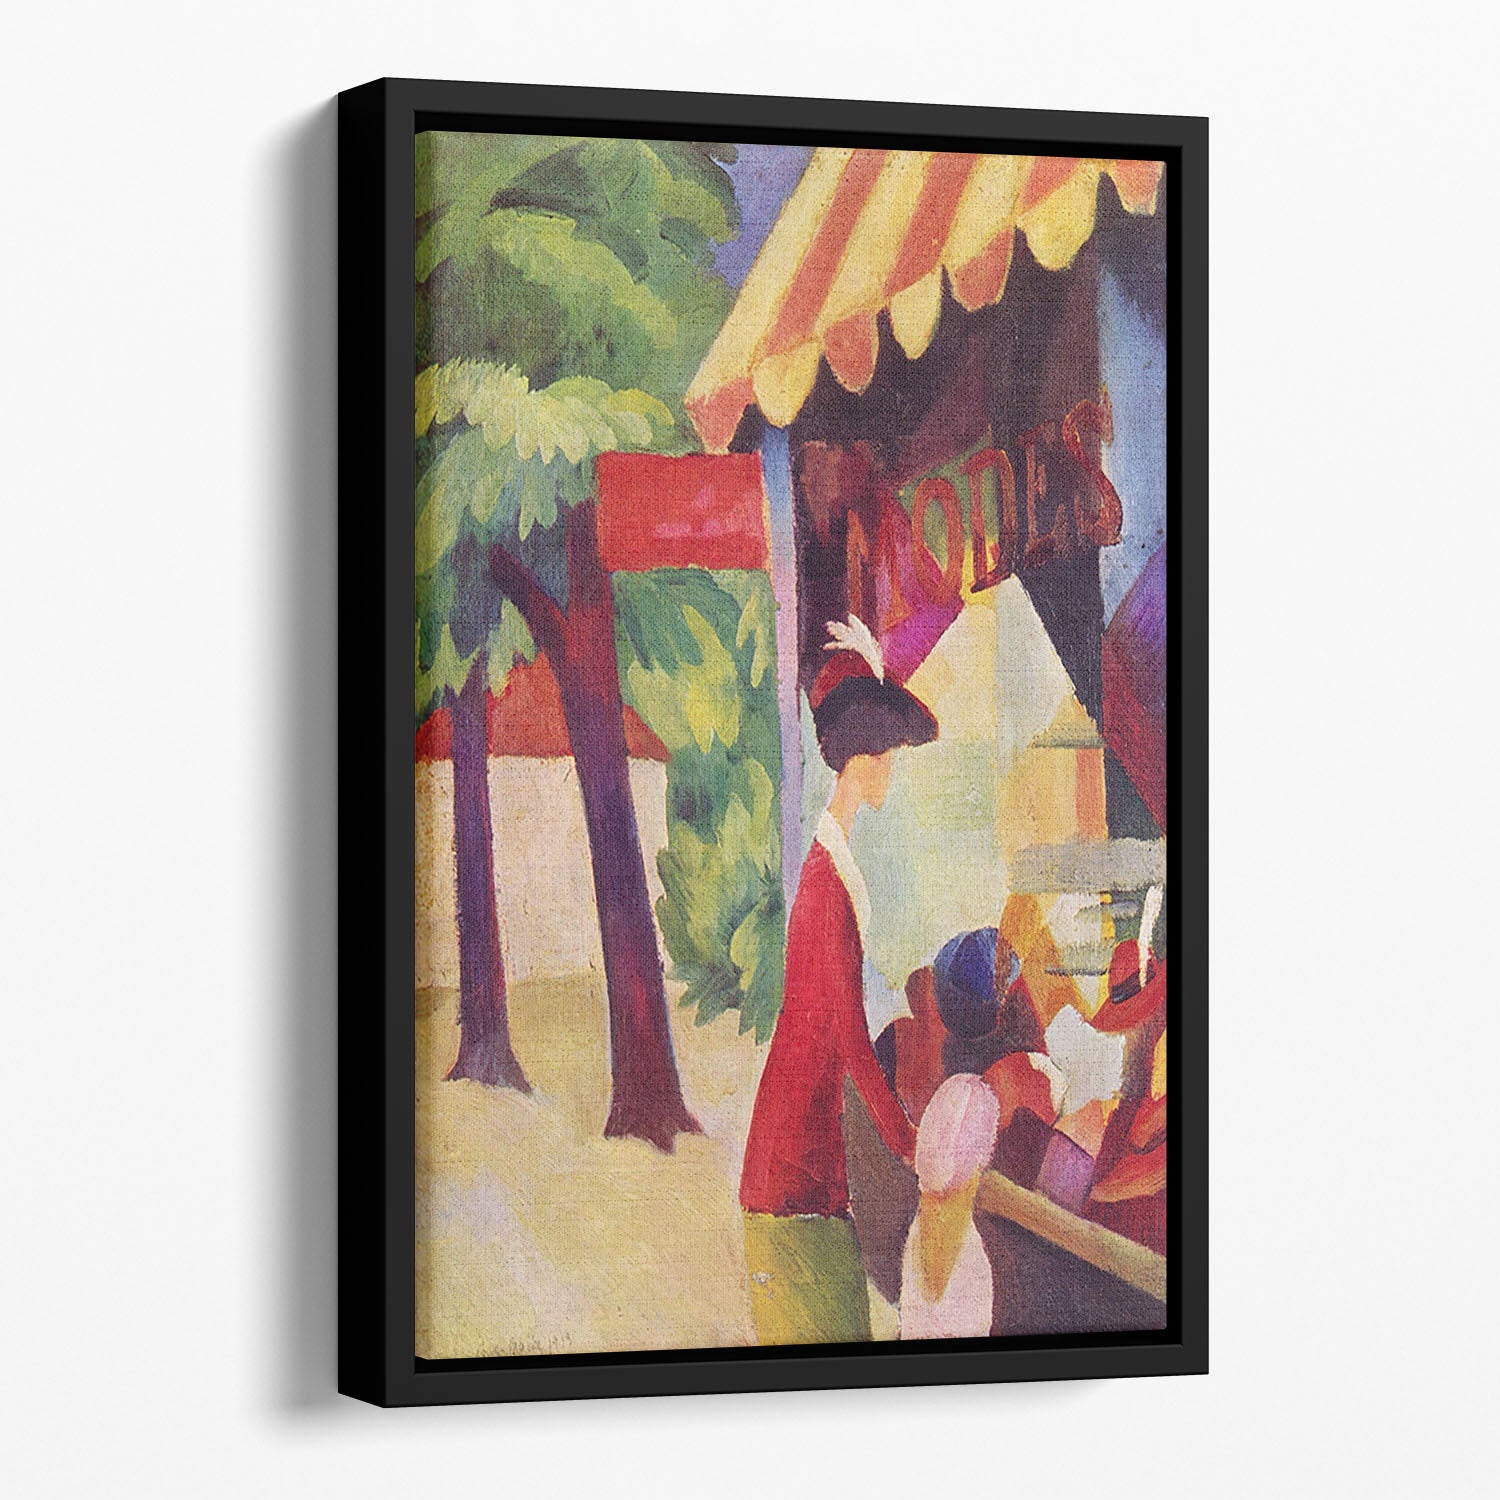 Before Hutladen woman with a red jacket and child by Macke Floating Framed Canvas - Canvas Art Rocks - 1